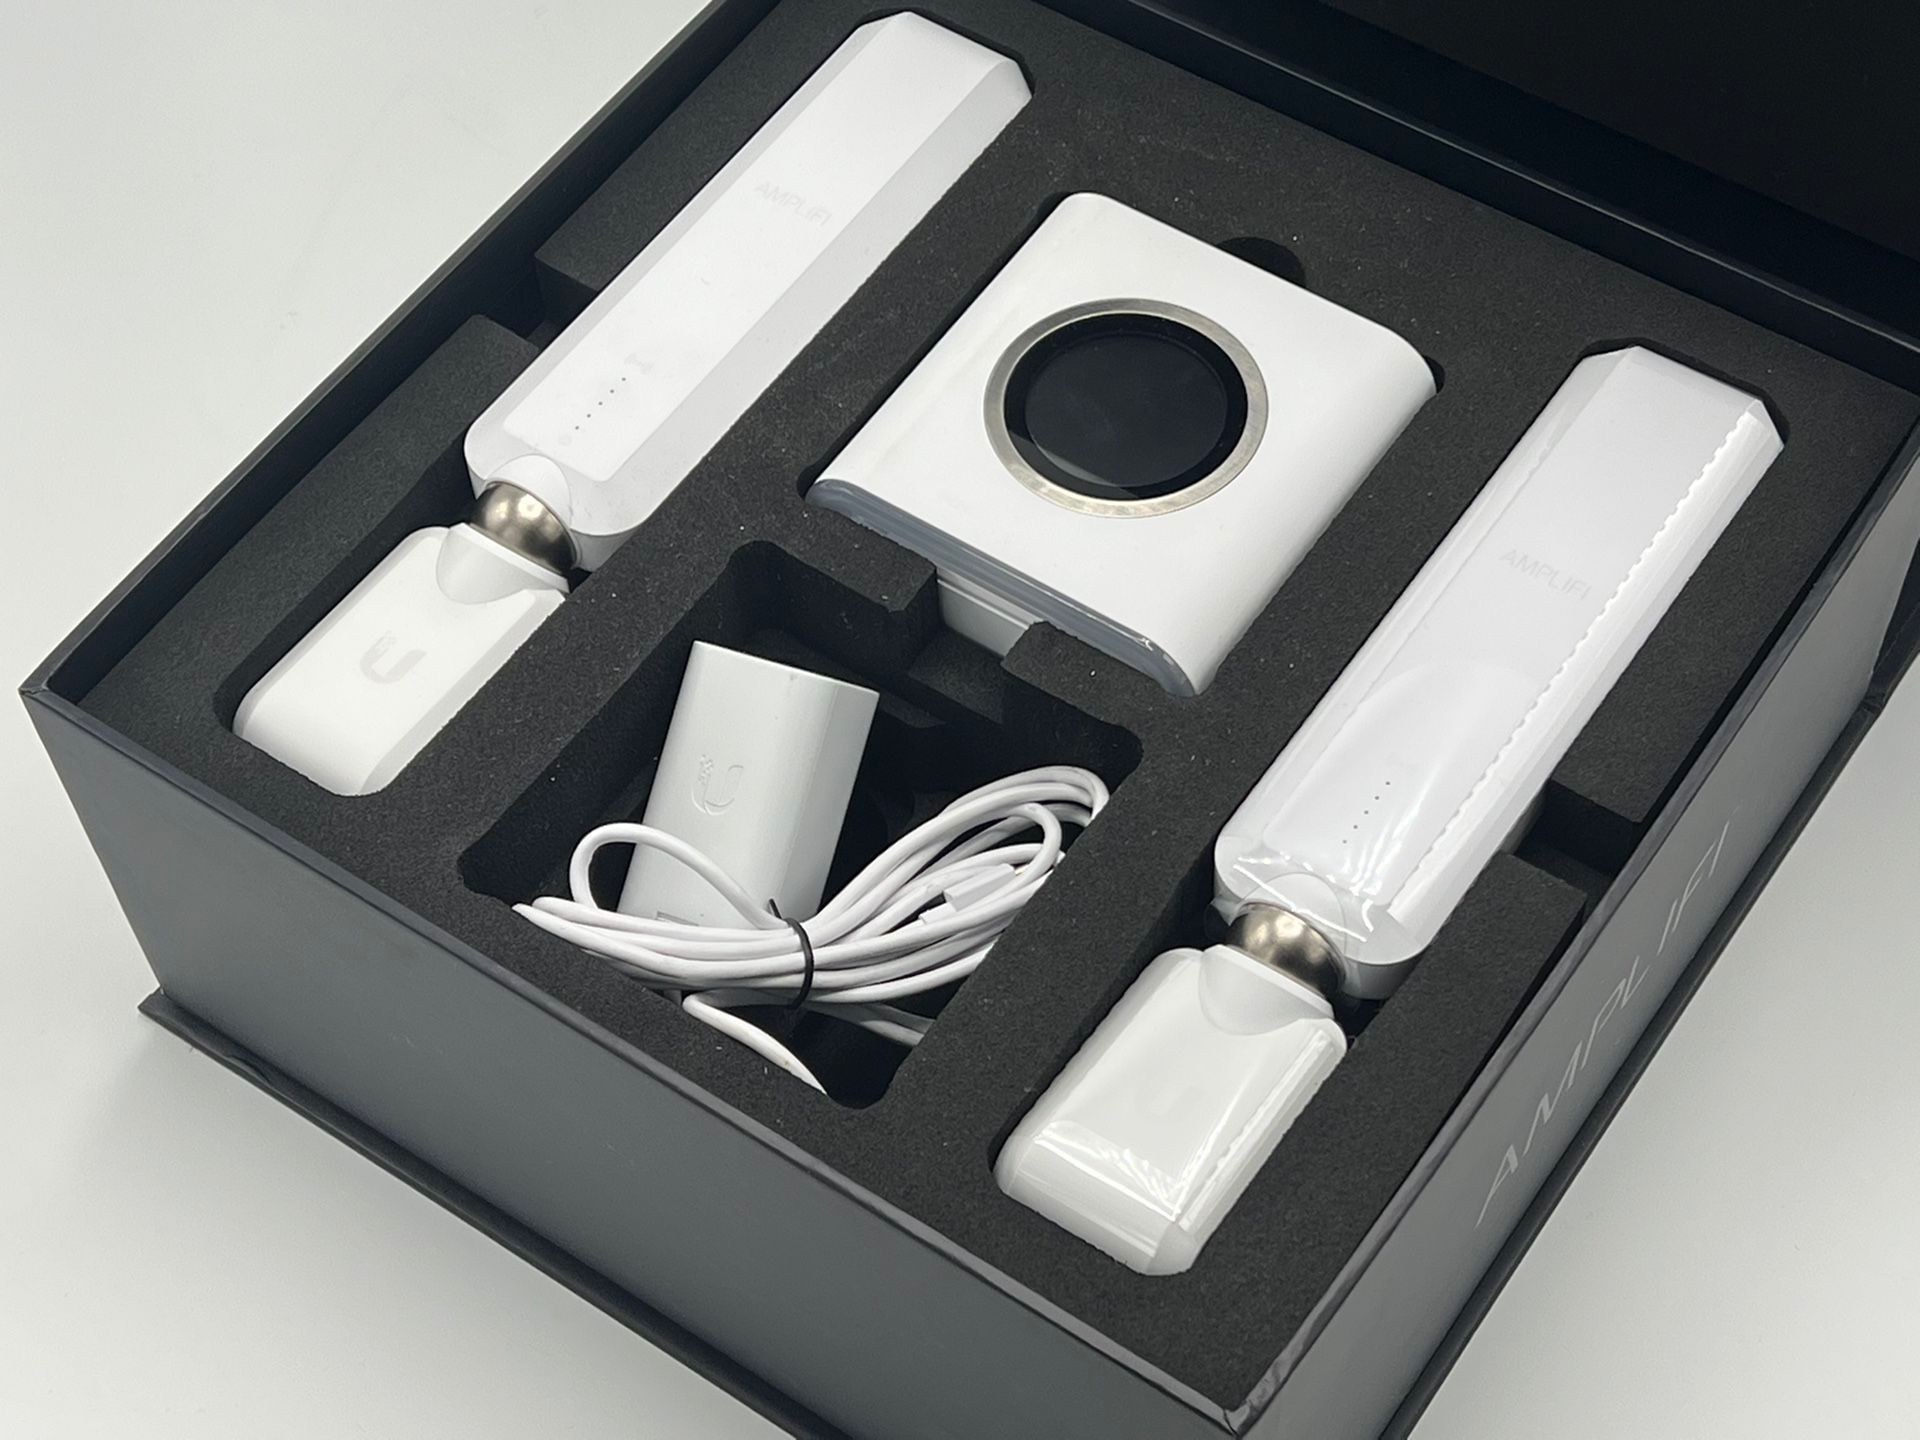 AmpliFi HD WiFi Mesh Points System by Ubiquiti Labs